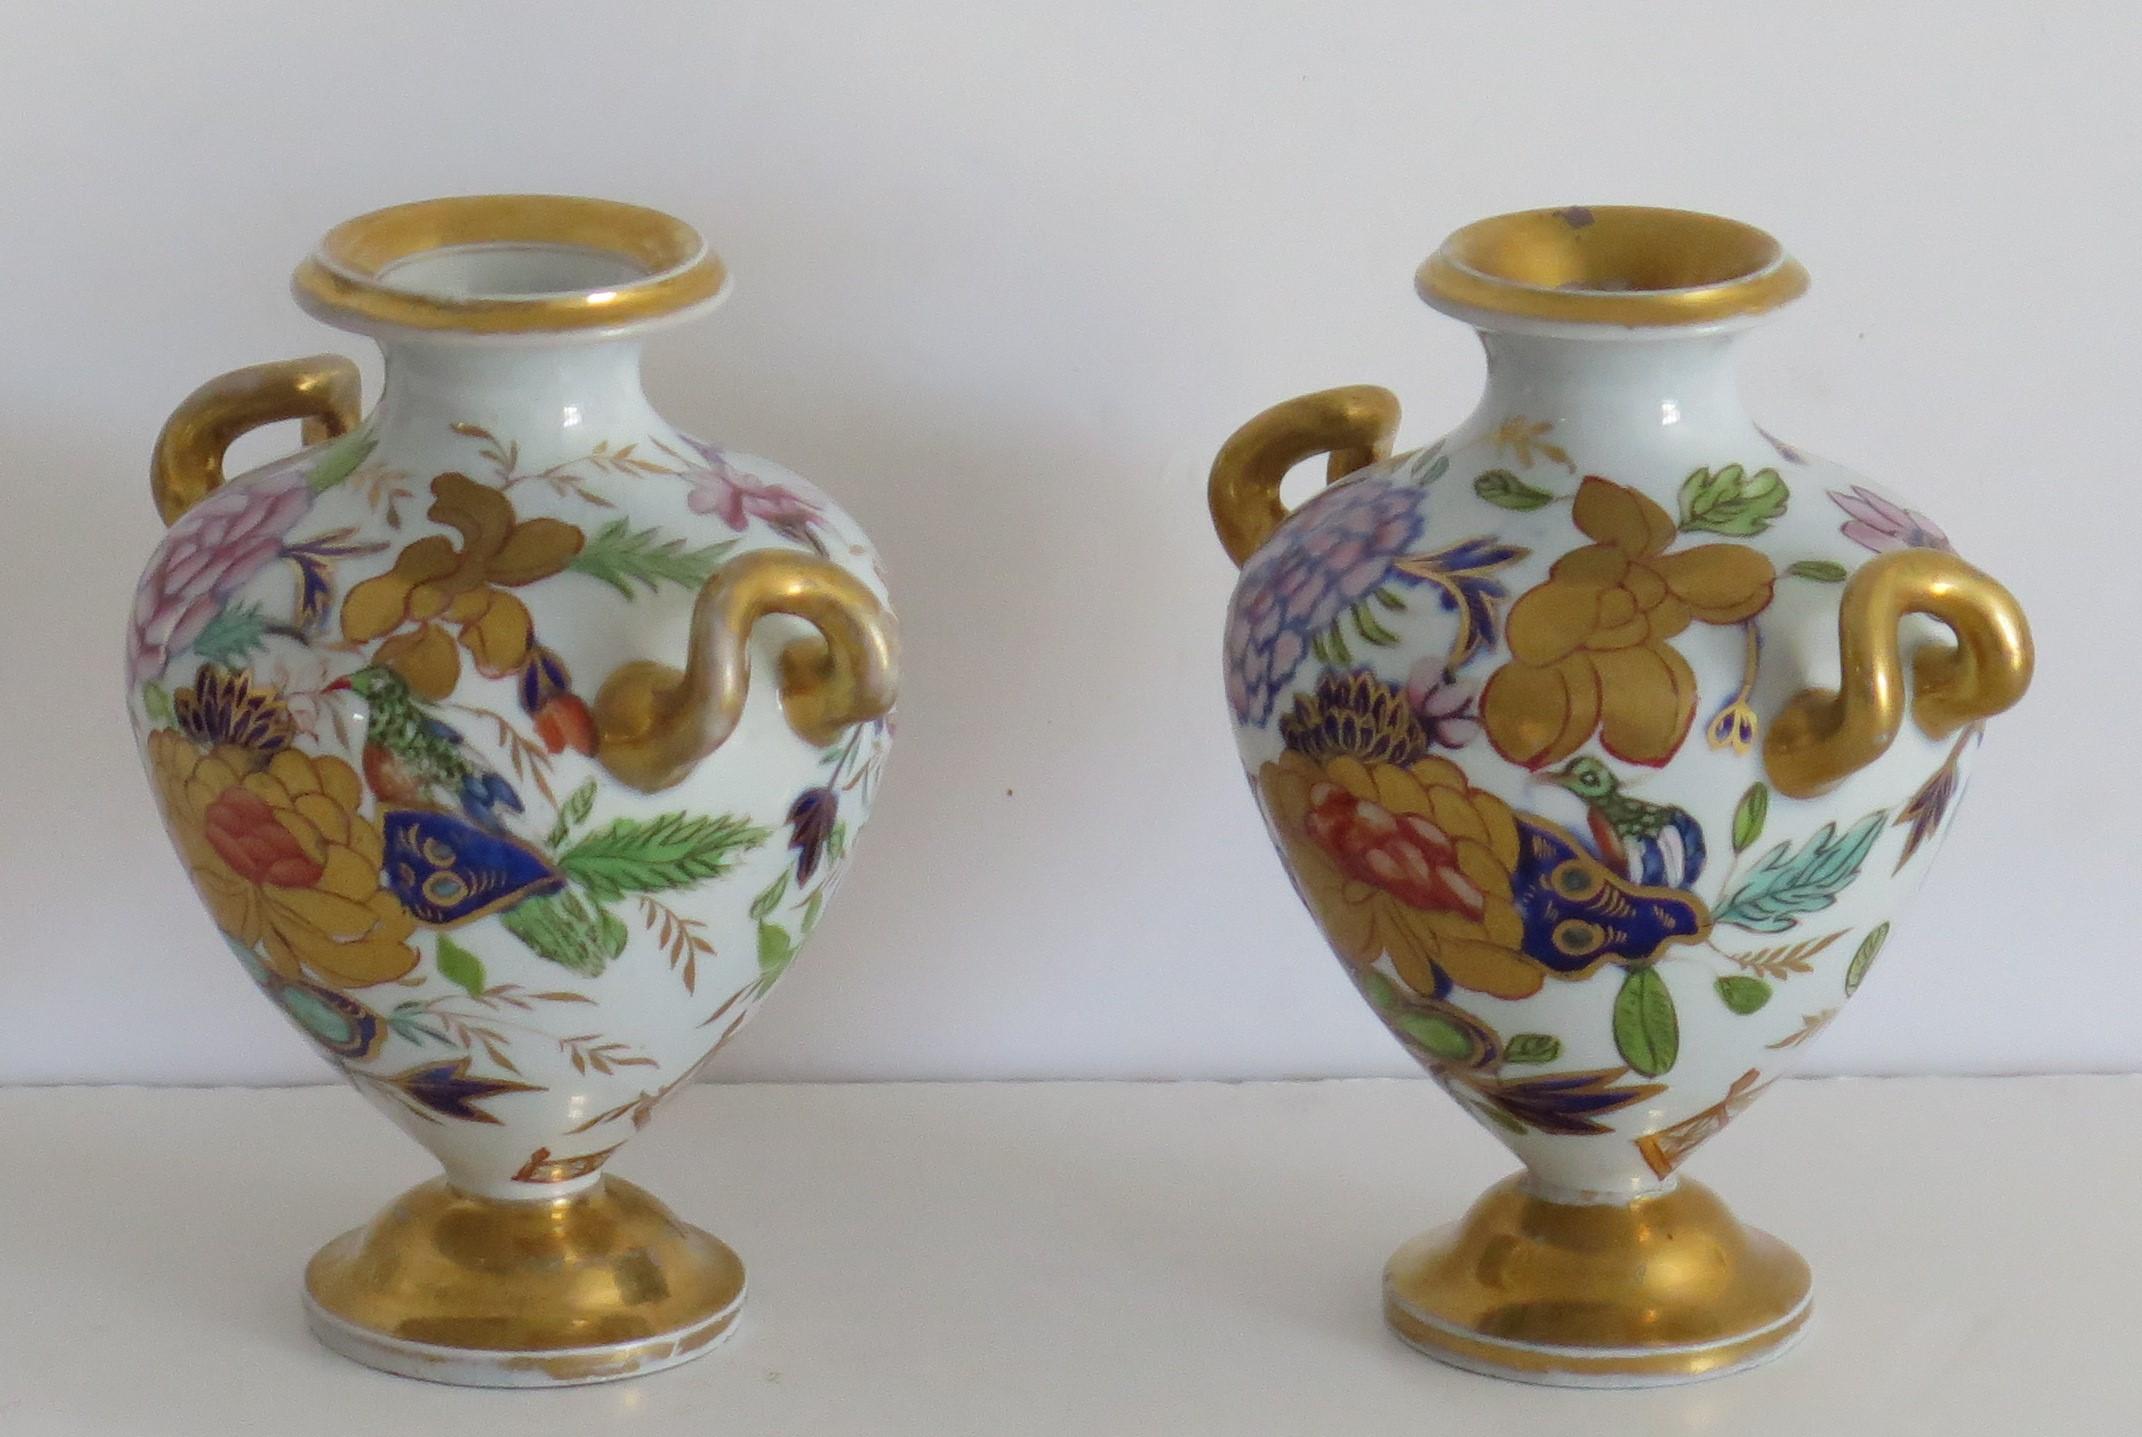 Chinoiserie Rare Pair Mason's Ironstone Miniature Vases Fence Rock & Gold Flower Ptn Ca 1820 For Sale